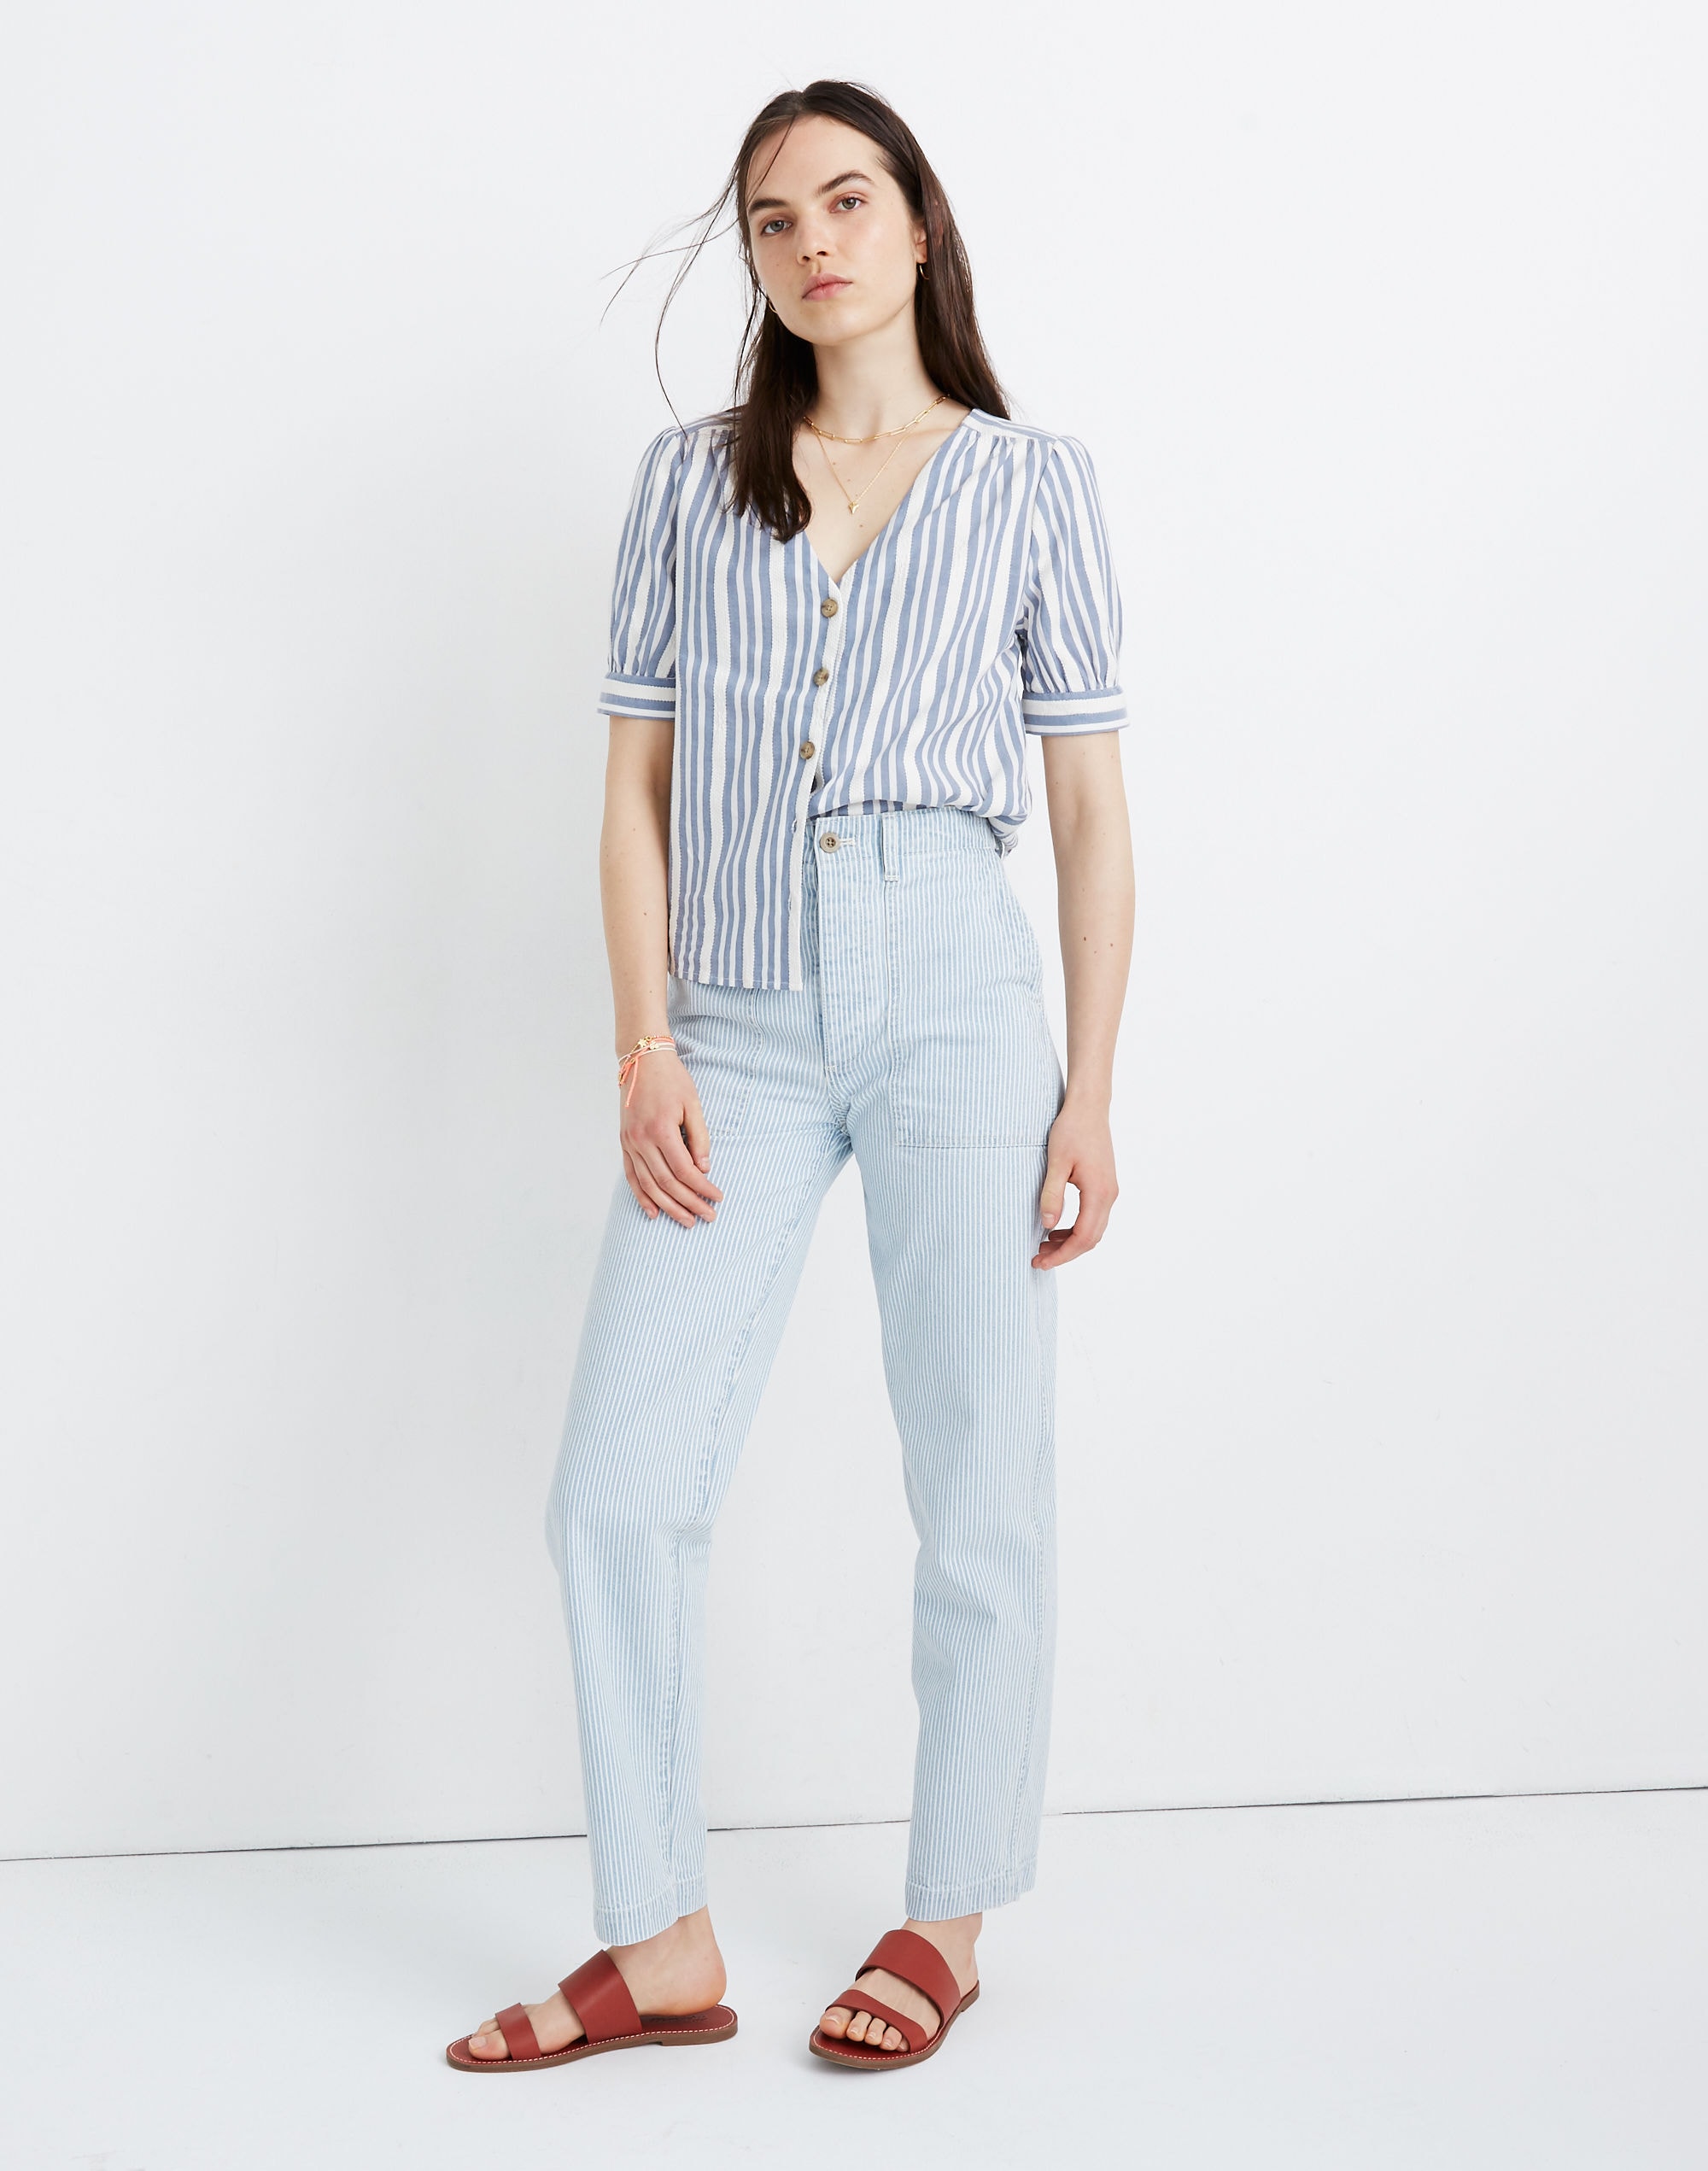 Plaza Button-Front Shirt in Stripe